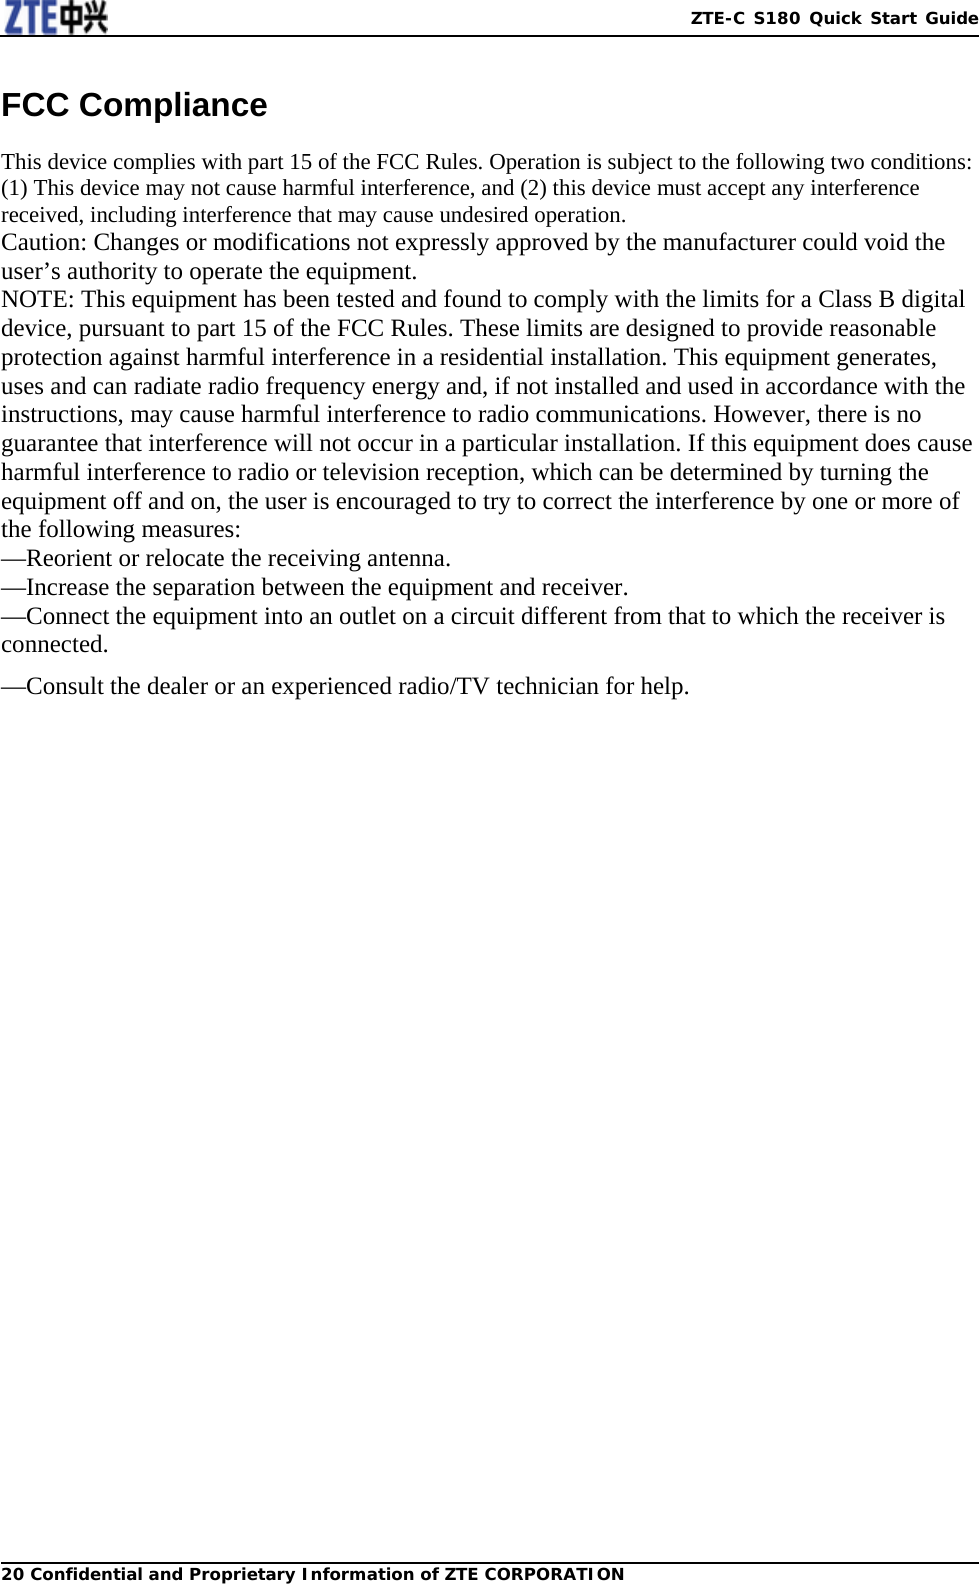   ZTE-C S180 Quick Start Guide20 Confidential and Proprietary Information of ZTE CORPORATIONFCC Compliance  This device complies with part 15 of the FCC Rules. Operation is subject to the following two conditions: (1) This device may not cause harmful interference, and (2) this device must accept any interference received, including interference that may cause undesired operation. Caution: Changes or modifications not expressly approved by the manufacturer could void the user’s authority to operate the equipment. NOTE: This equipment has been tested and found to comply with the limits for a Class B digital device, pursuant to part 15 of the FCC Rules. These limits are designed to provide reasonable protection against harmful interference in a residential installation. This equipment generates, uses and can radiate radio frequency energy and, if not installed and used in accordance with the instructions, may cause harmful interference to radio communications. However, there is no guarantee that interference will not occur in a particular installation. If this equipment does cause harmful interference to radio or television reception, which can be determined by turning the equipment off and on, the user is encouraged to try to correct the interference by one or more of the following measures: —Reorient or relocate the receiving antenna. —Increase the separation between the equipment and receiver. —Connect the equipment into an outlet on a circuit different from that to which the receiver is connected. —Consult the dealer or an experienced radio/TV technician for help.